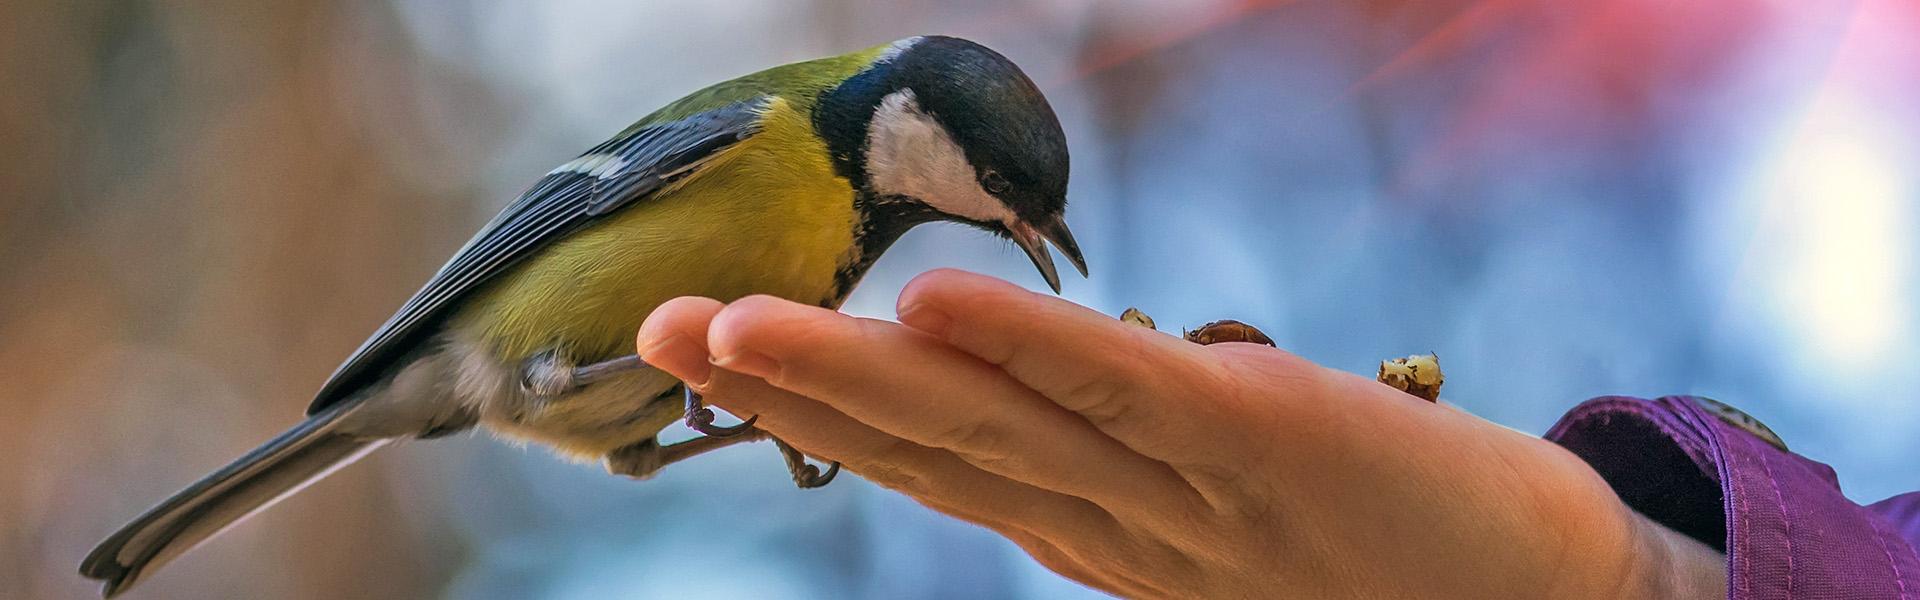 A blue tit feeding from a person's hand